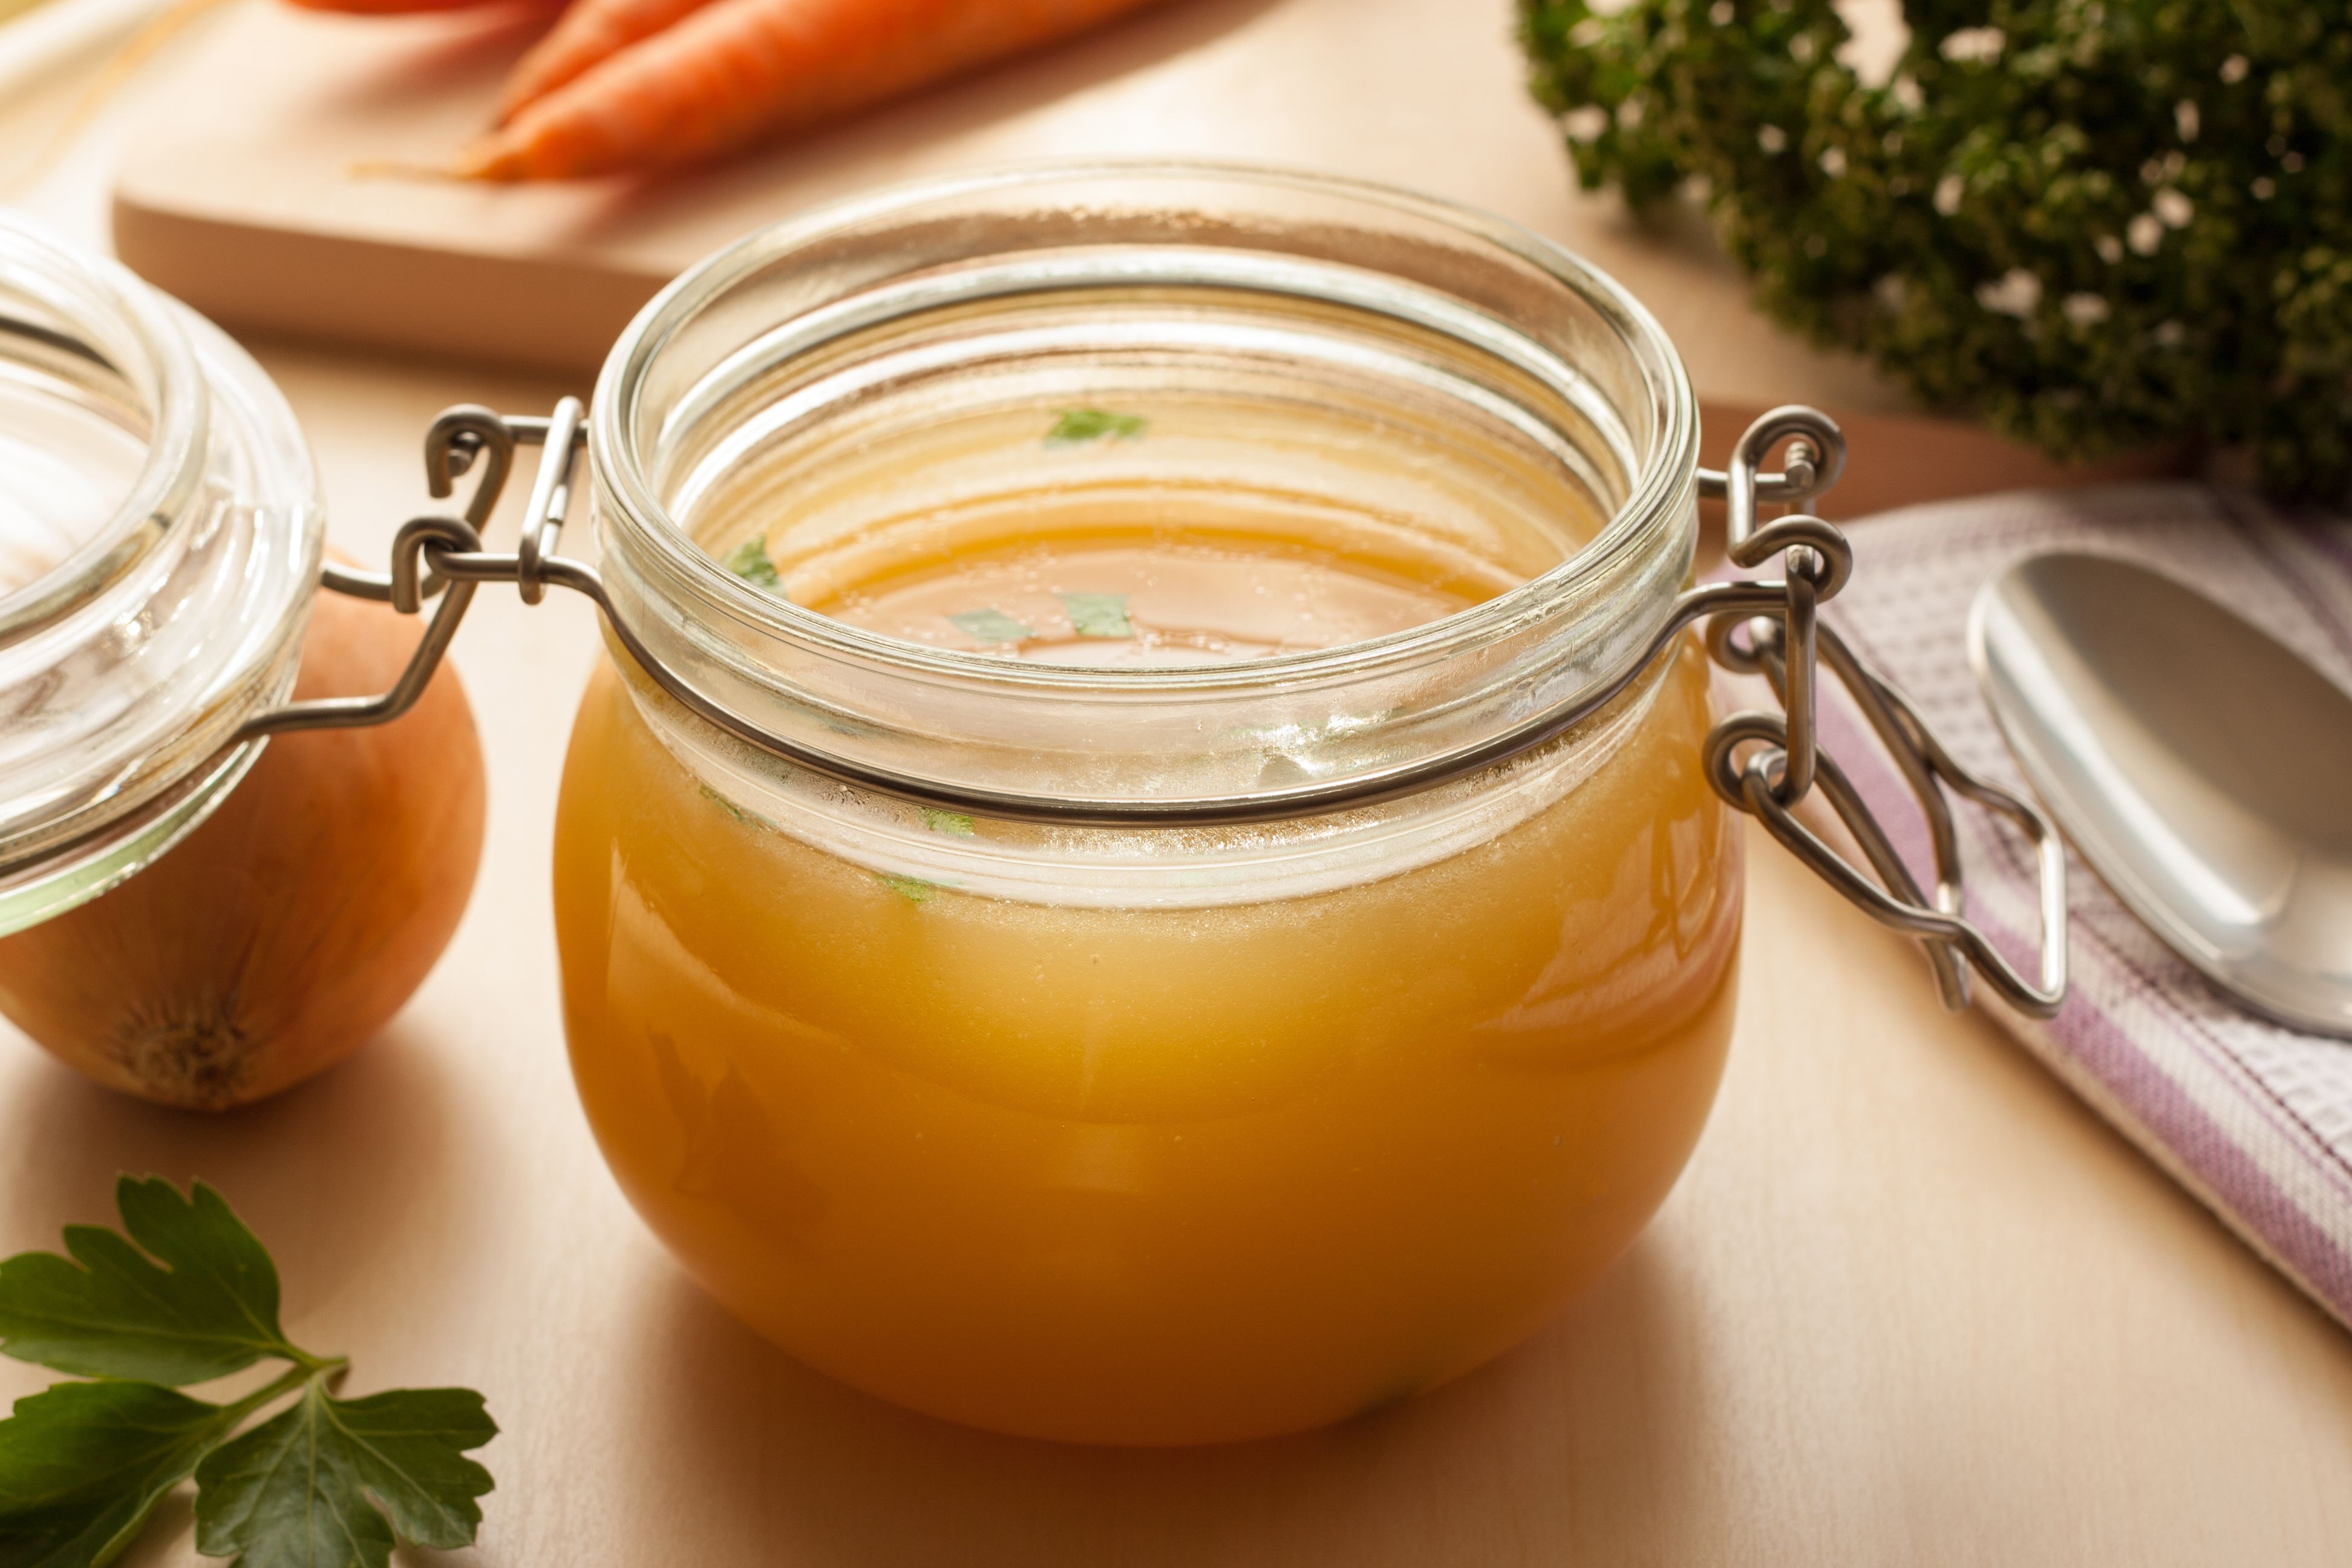 Bone Broth vs Stock: Which is better?